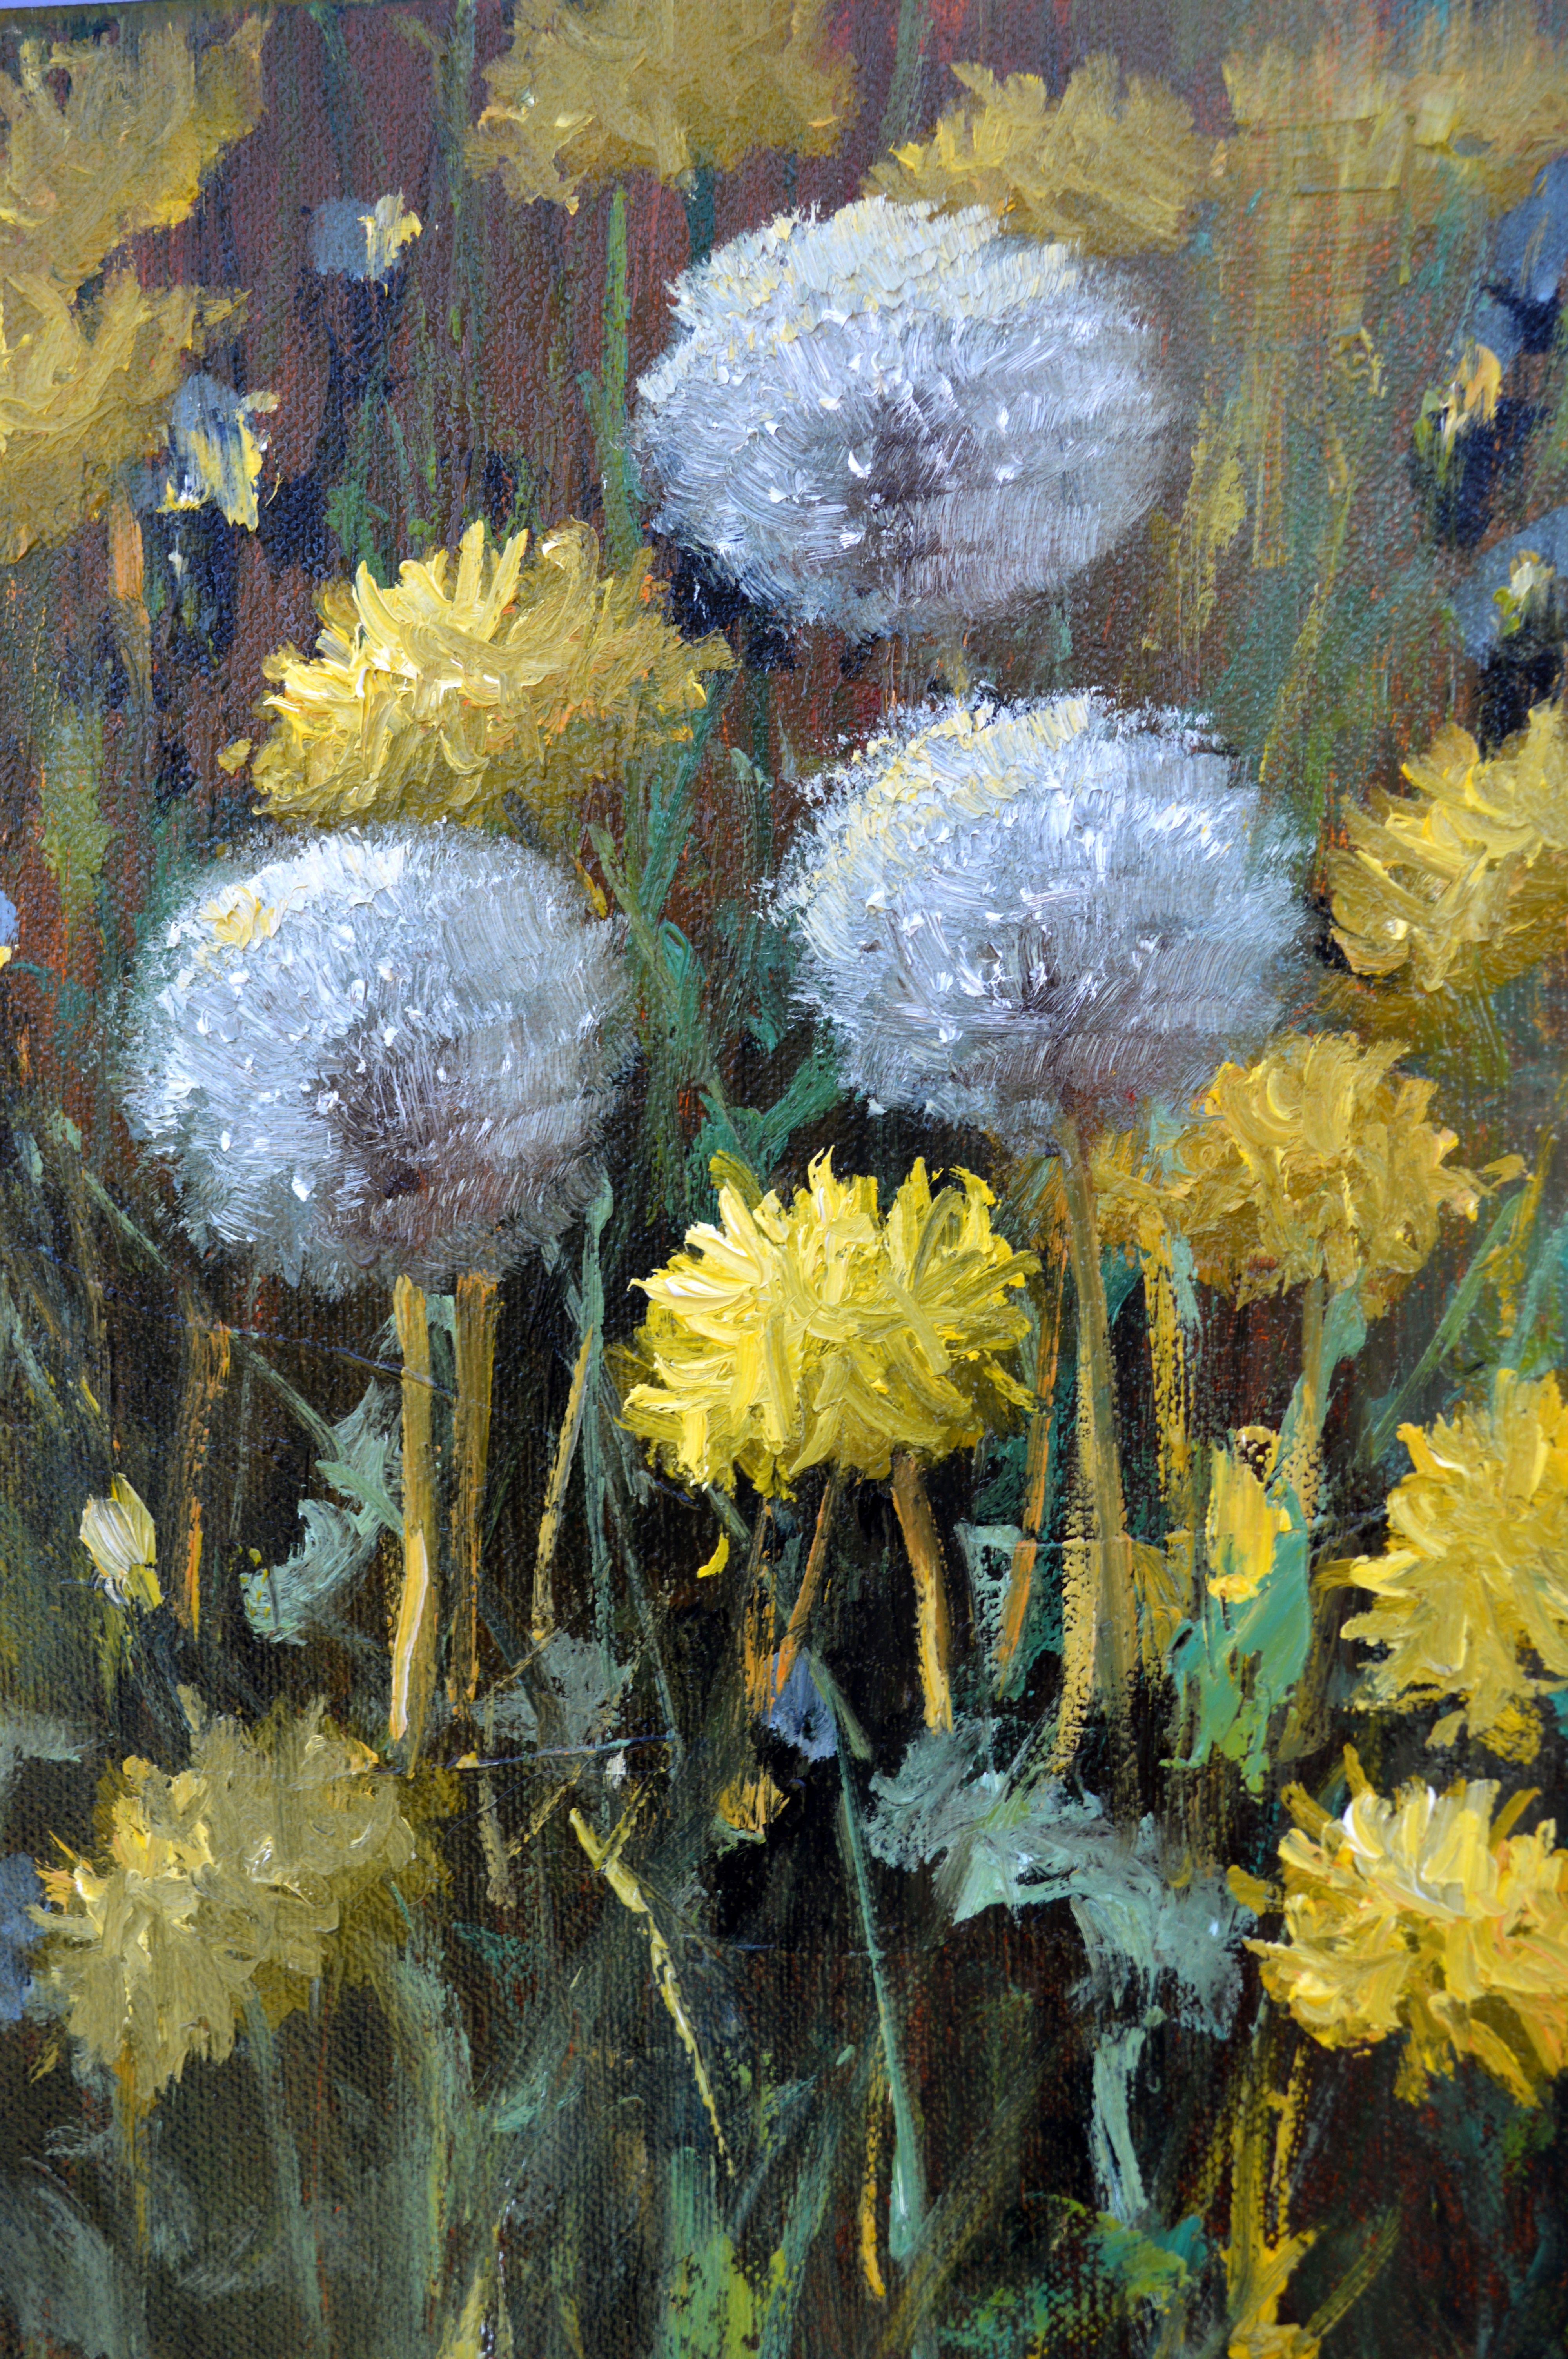 In this oil painting, I sought to capture the delicate interplay between strength and ephemeral beauty. The dandelions, poised against a field of gold and green, embody nature's fleeting moments. My brush strokes carry energy and emotion, creating a